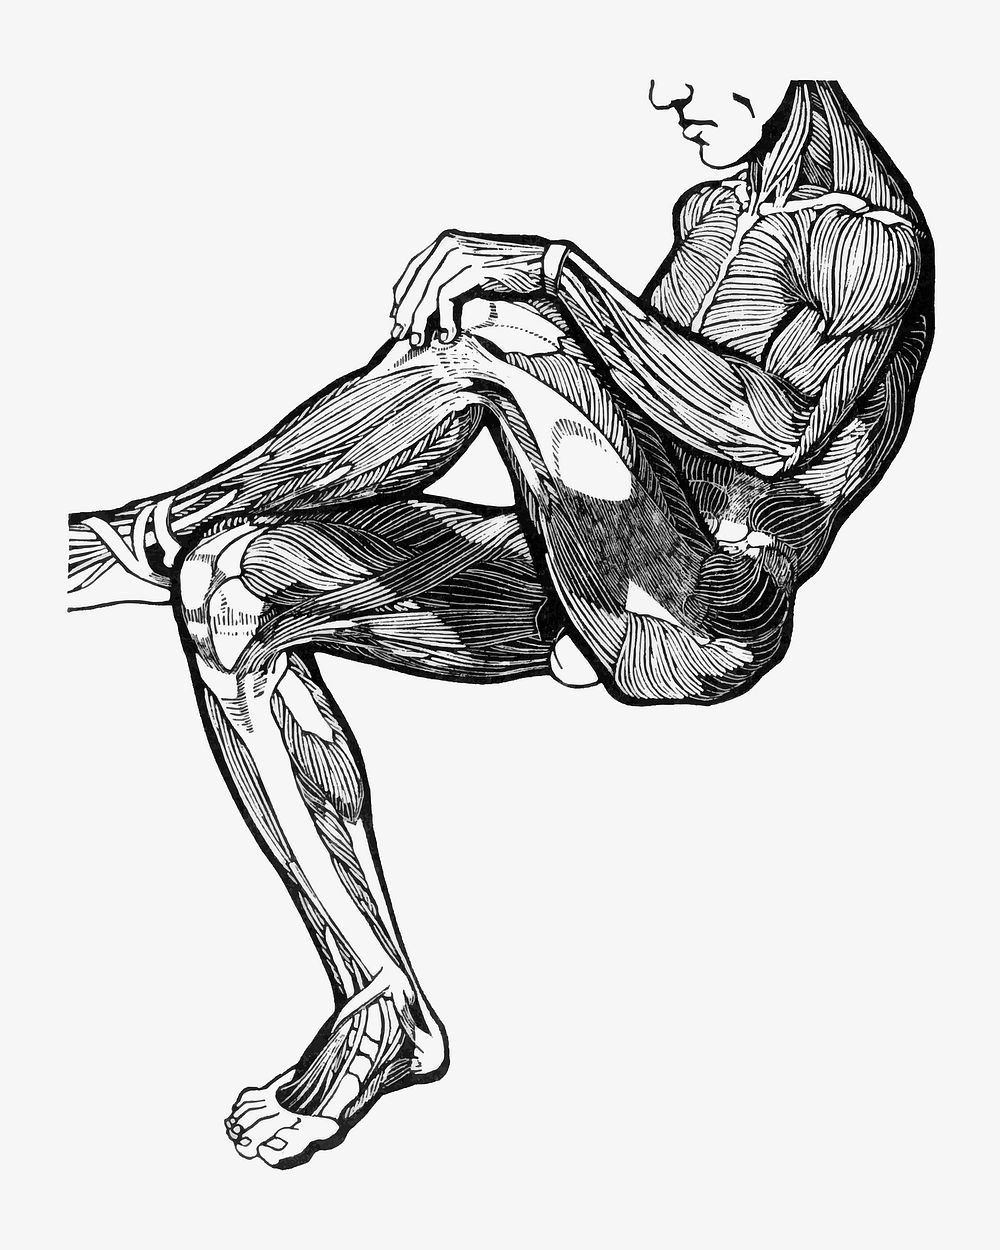 Human anatomy vector with leg and arm muscles, remixed from artworks by Reijer Stolk